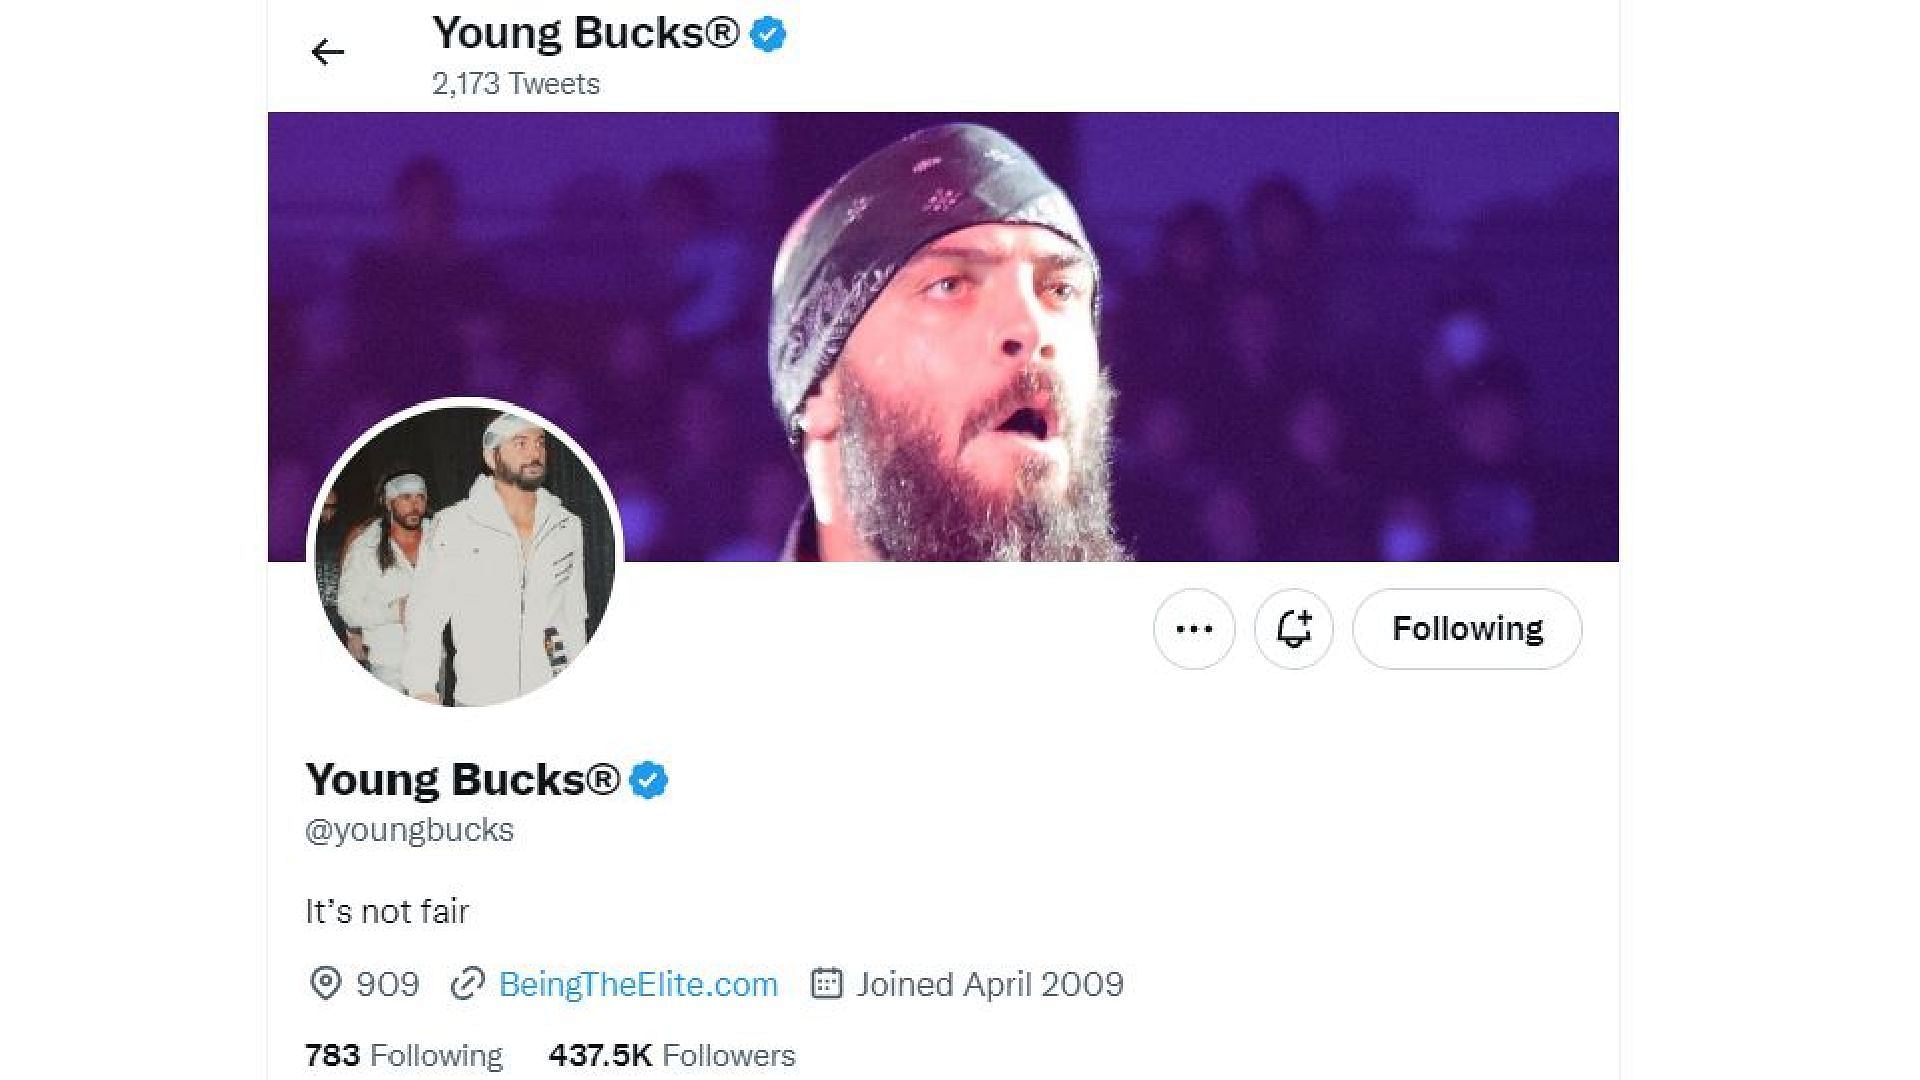 The Young Bucks updated their Twitter banner and bio